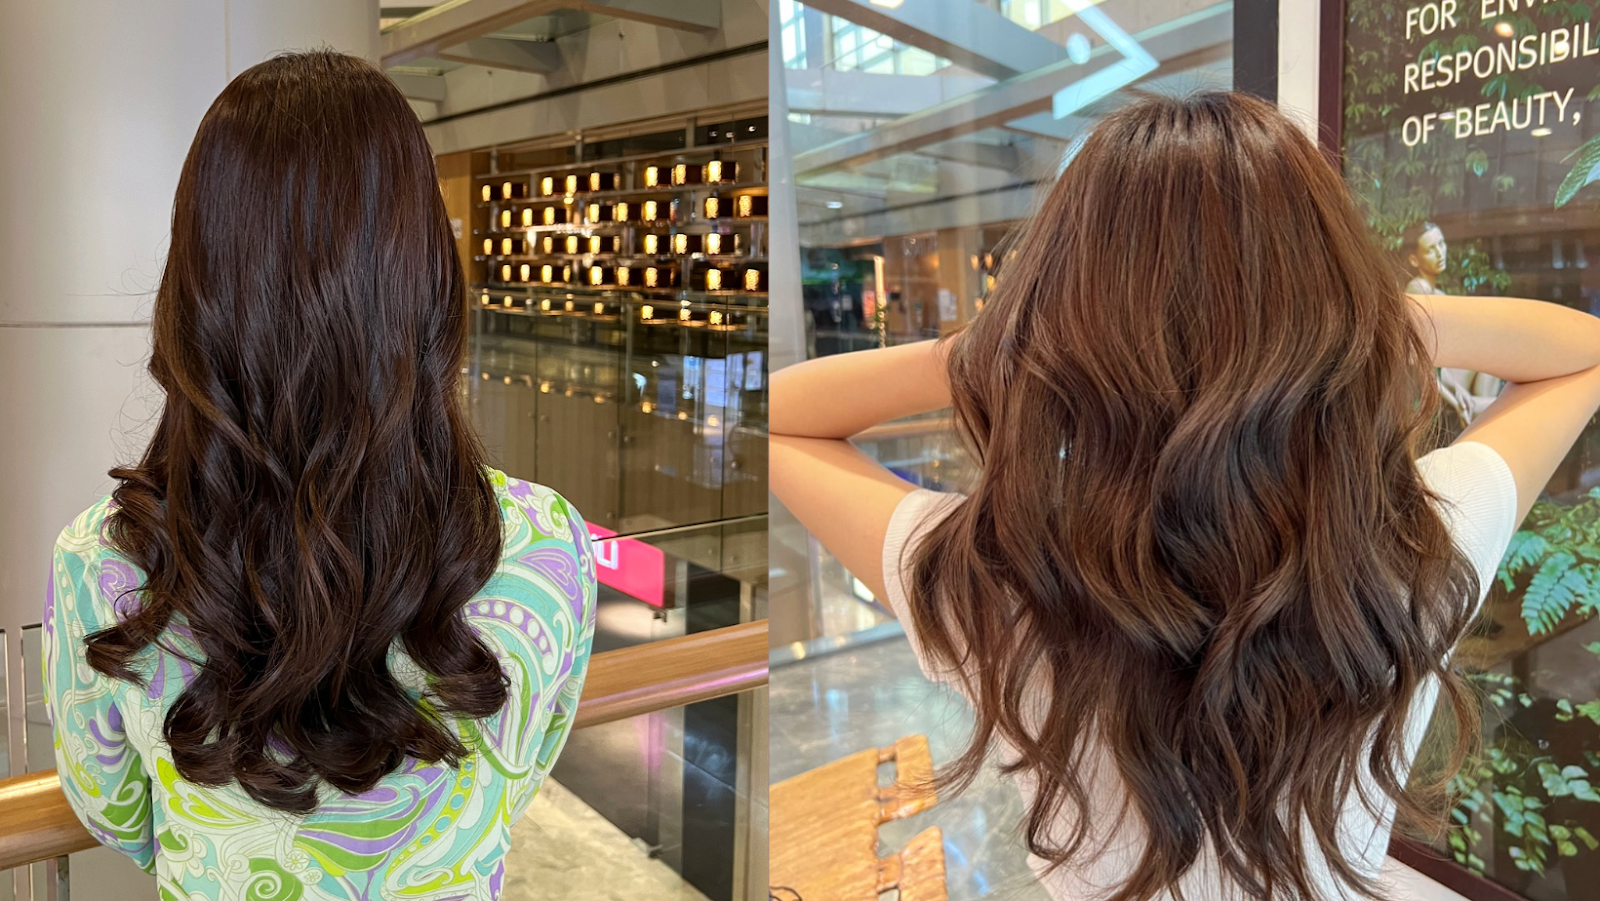 Transform Your Look with Digital Perm Hair at Kelture Aveda 4